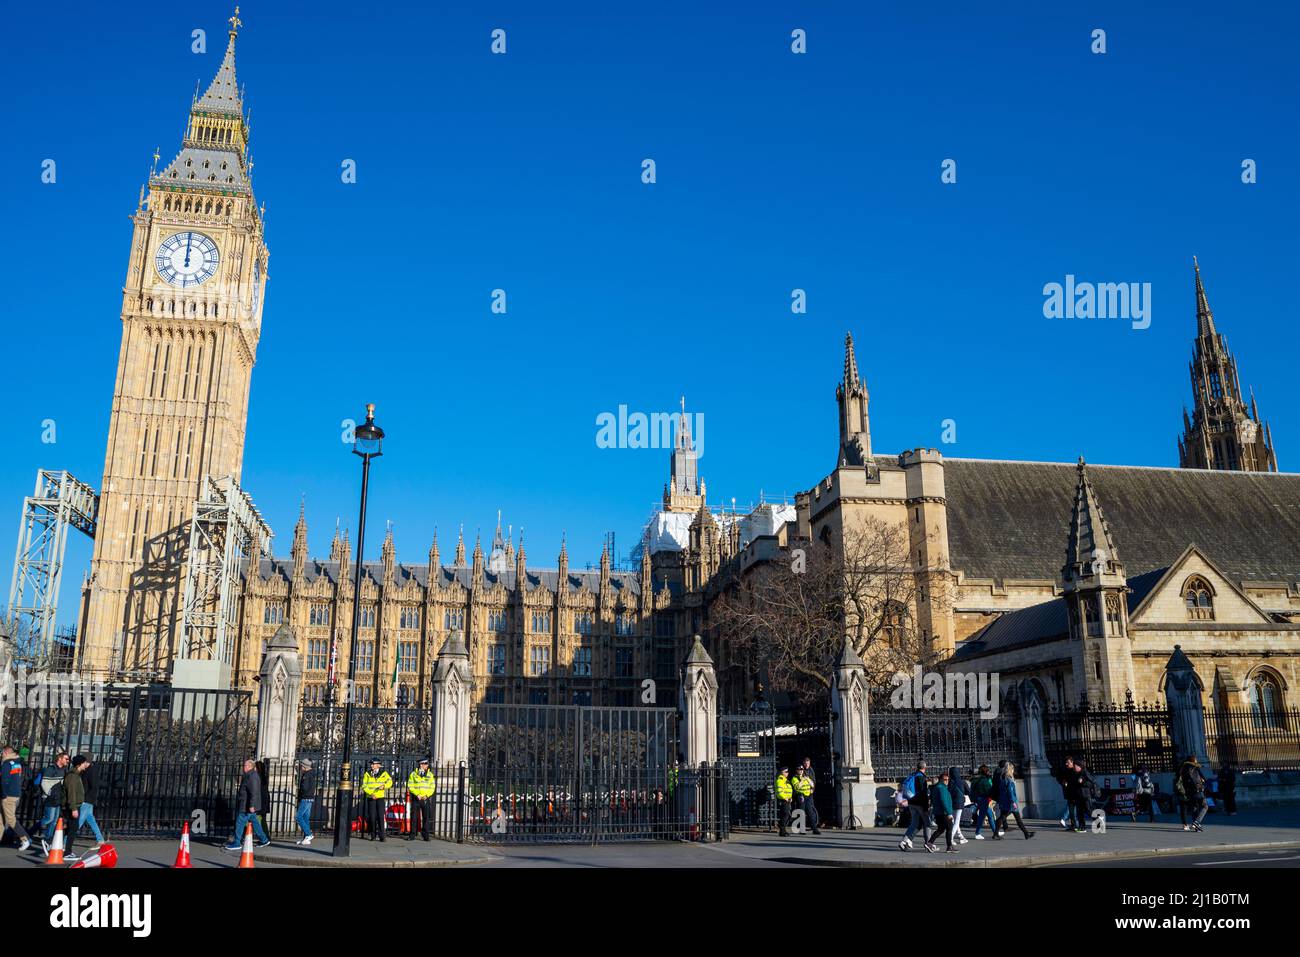 Recently uncovered restored Elizabeth Tower, Big Ben, of the Palace of Westminster, London, UK. New security gates to the Houses of Parliament Stock Photo